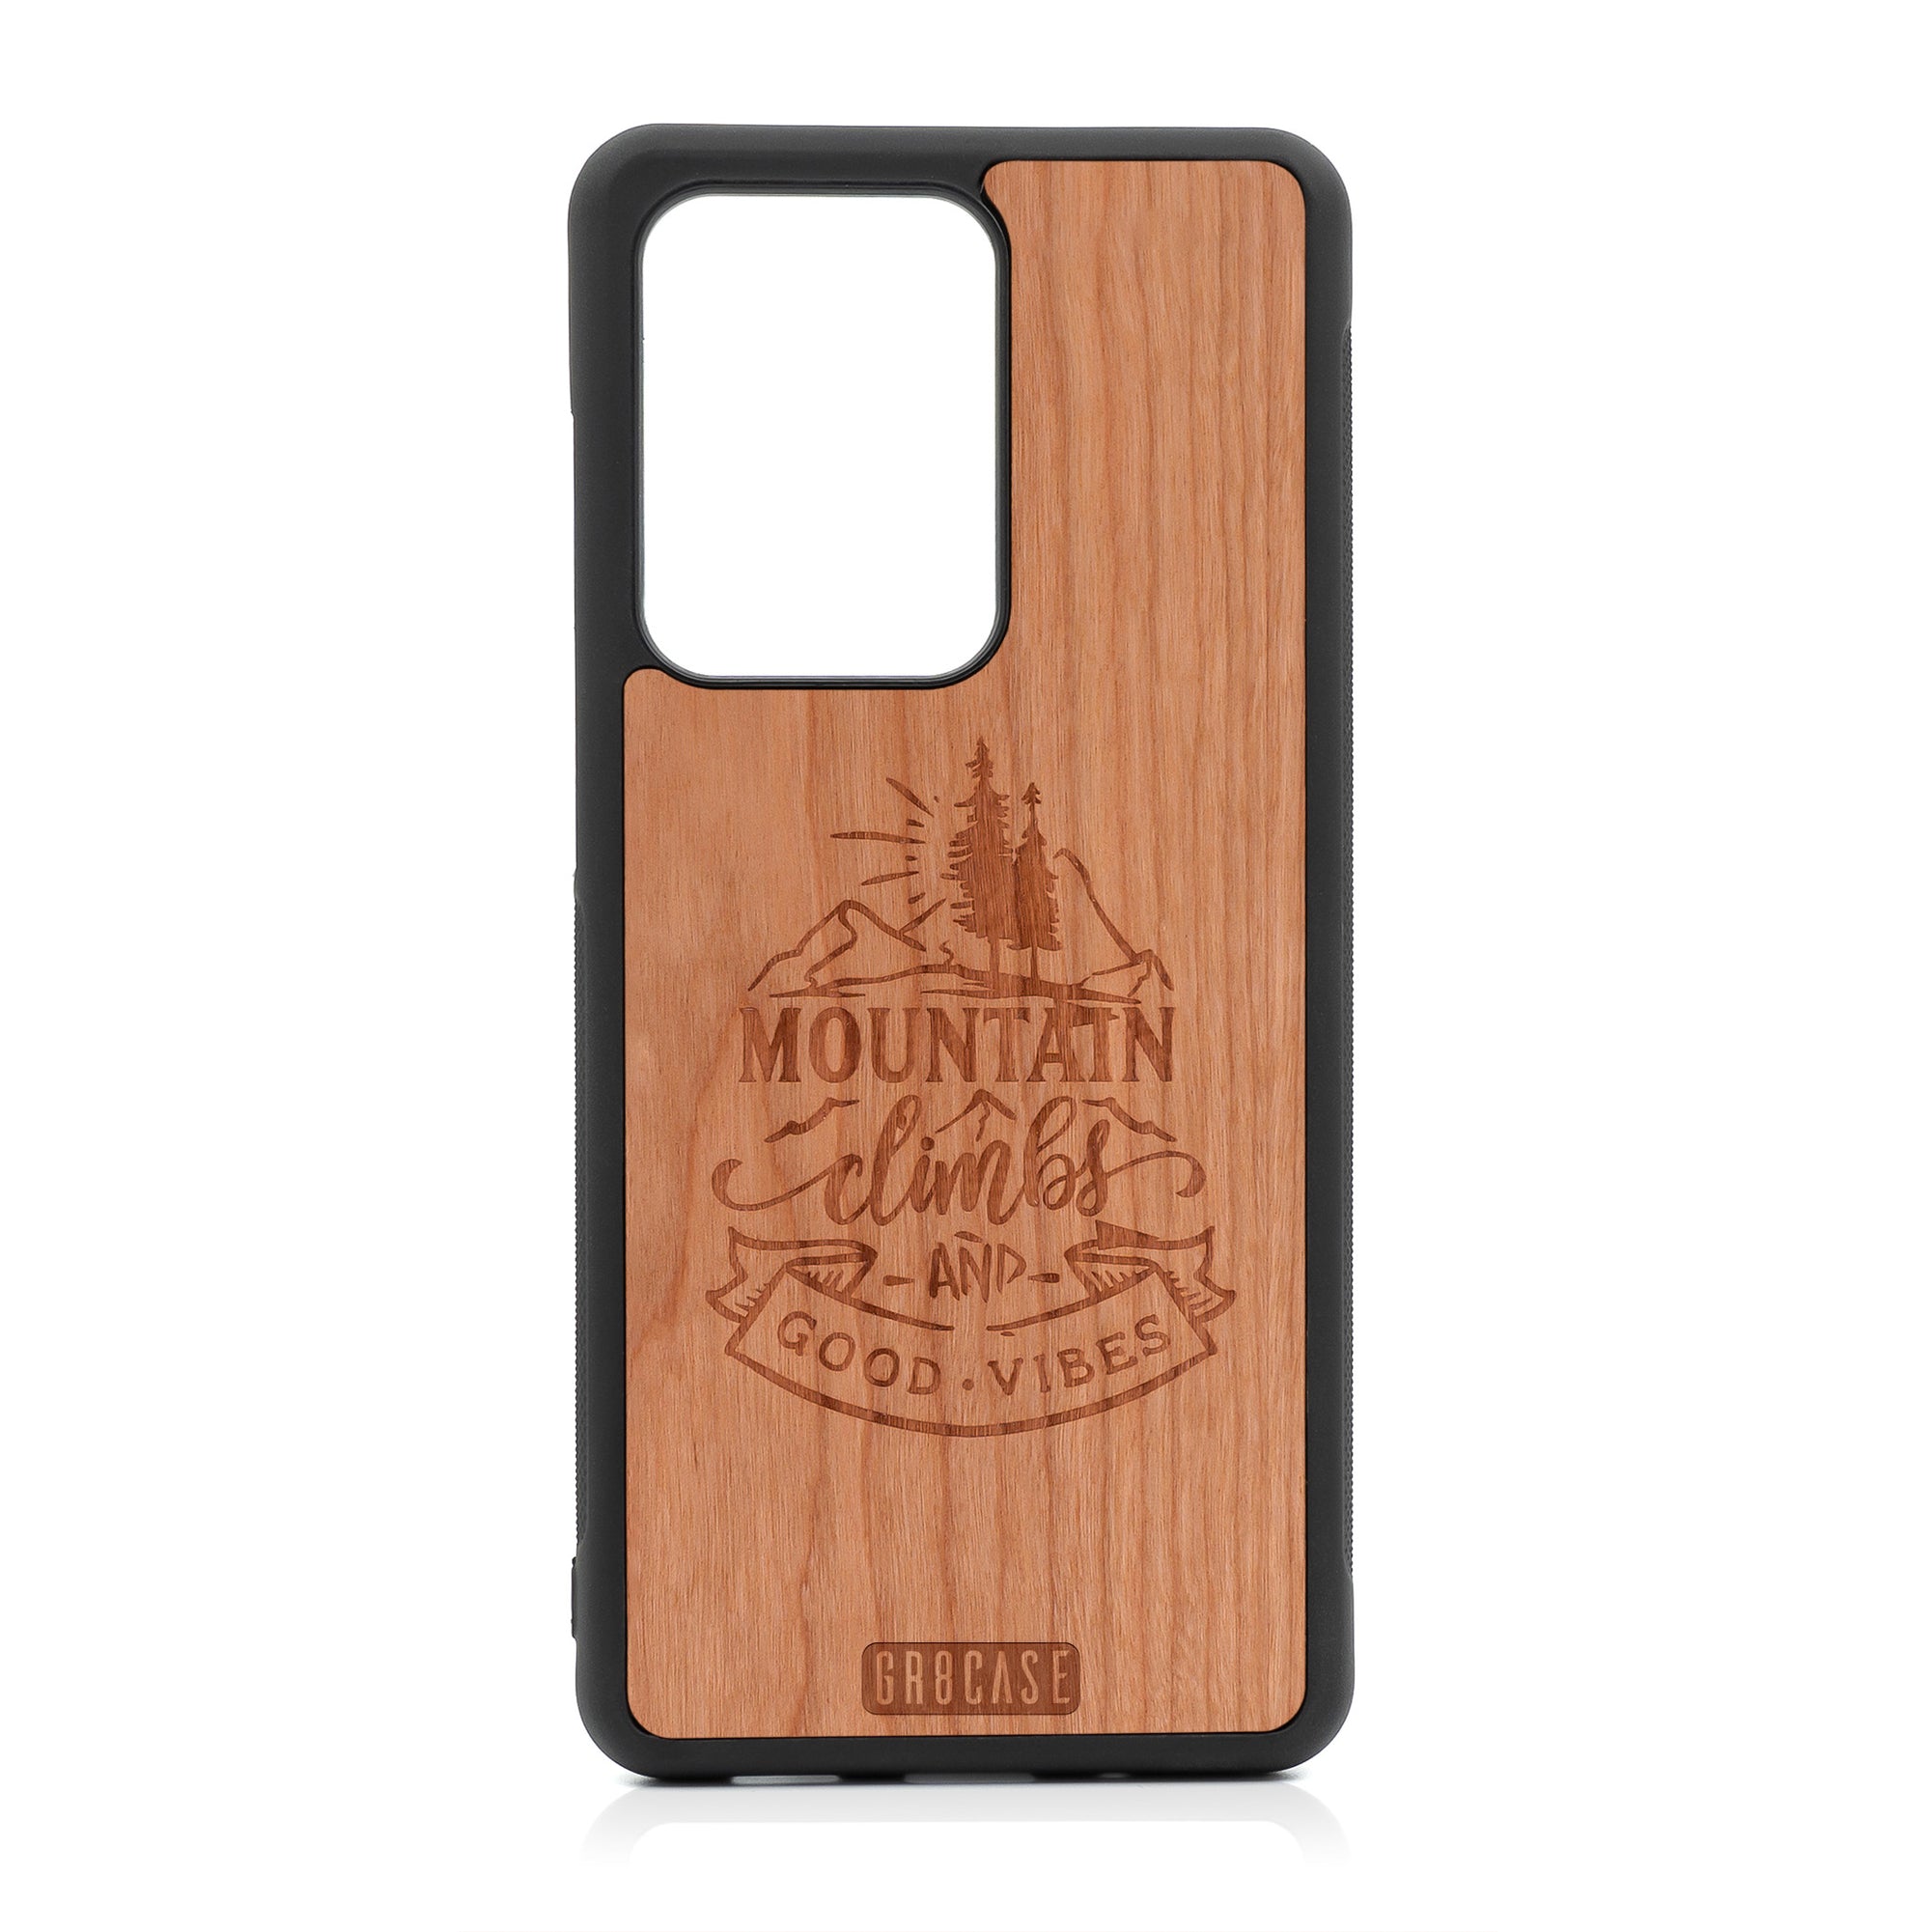 Mountain Climbs And Good Vibes Design Wood Case For Samsung Galaxy S20 Ultra by GR8CASE